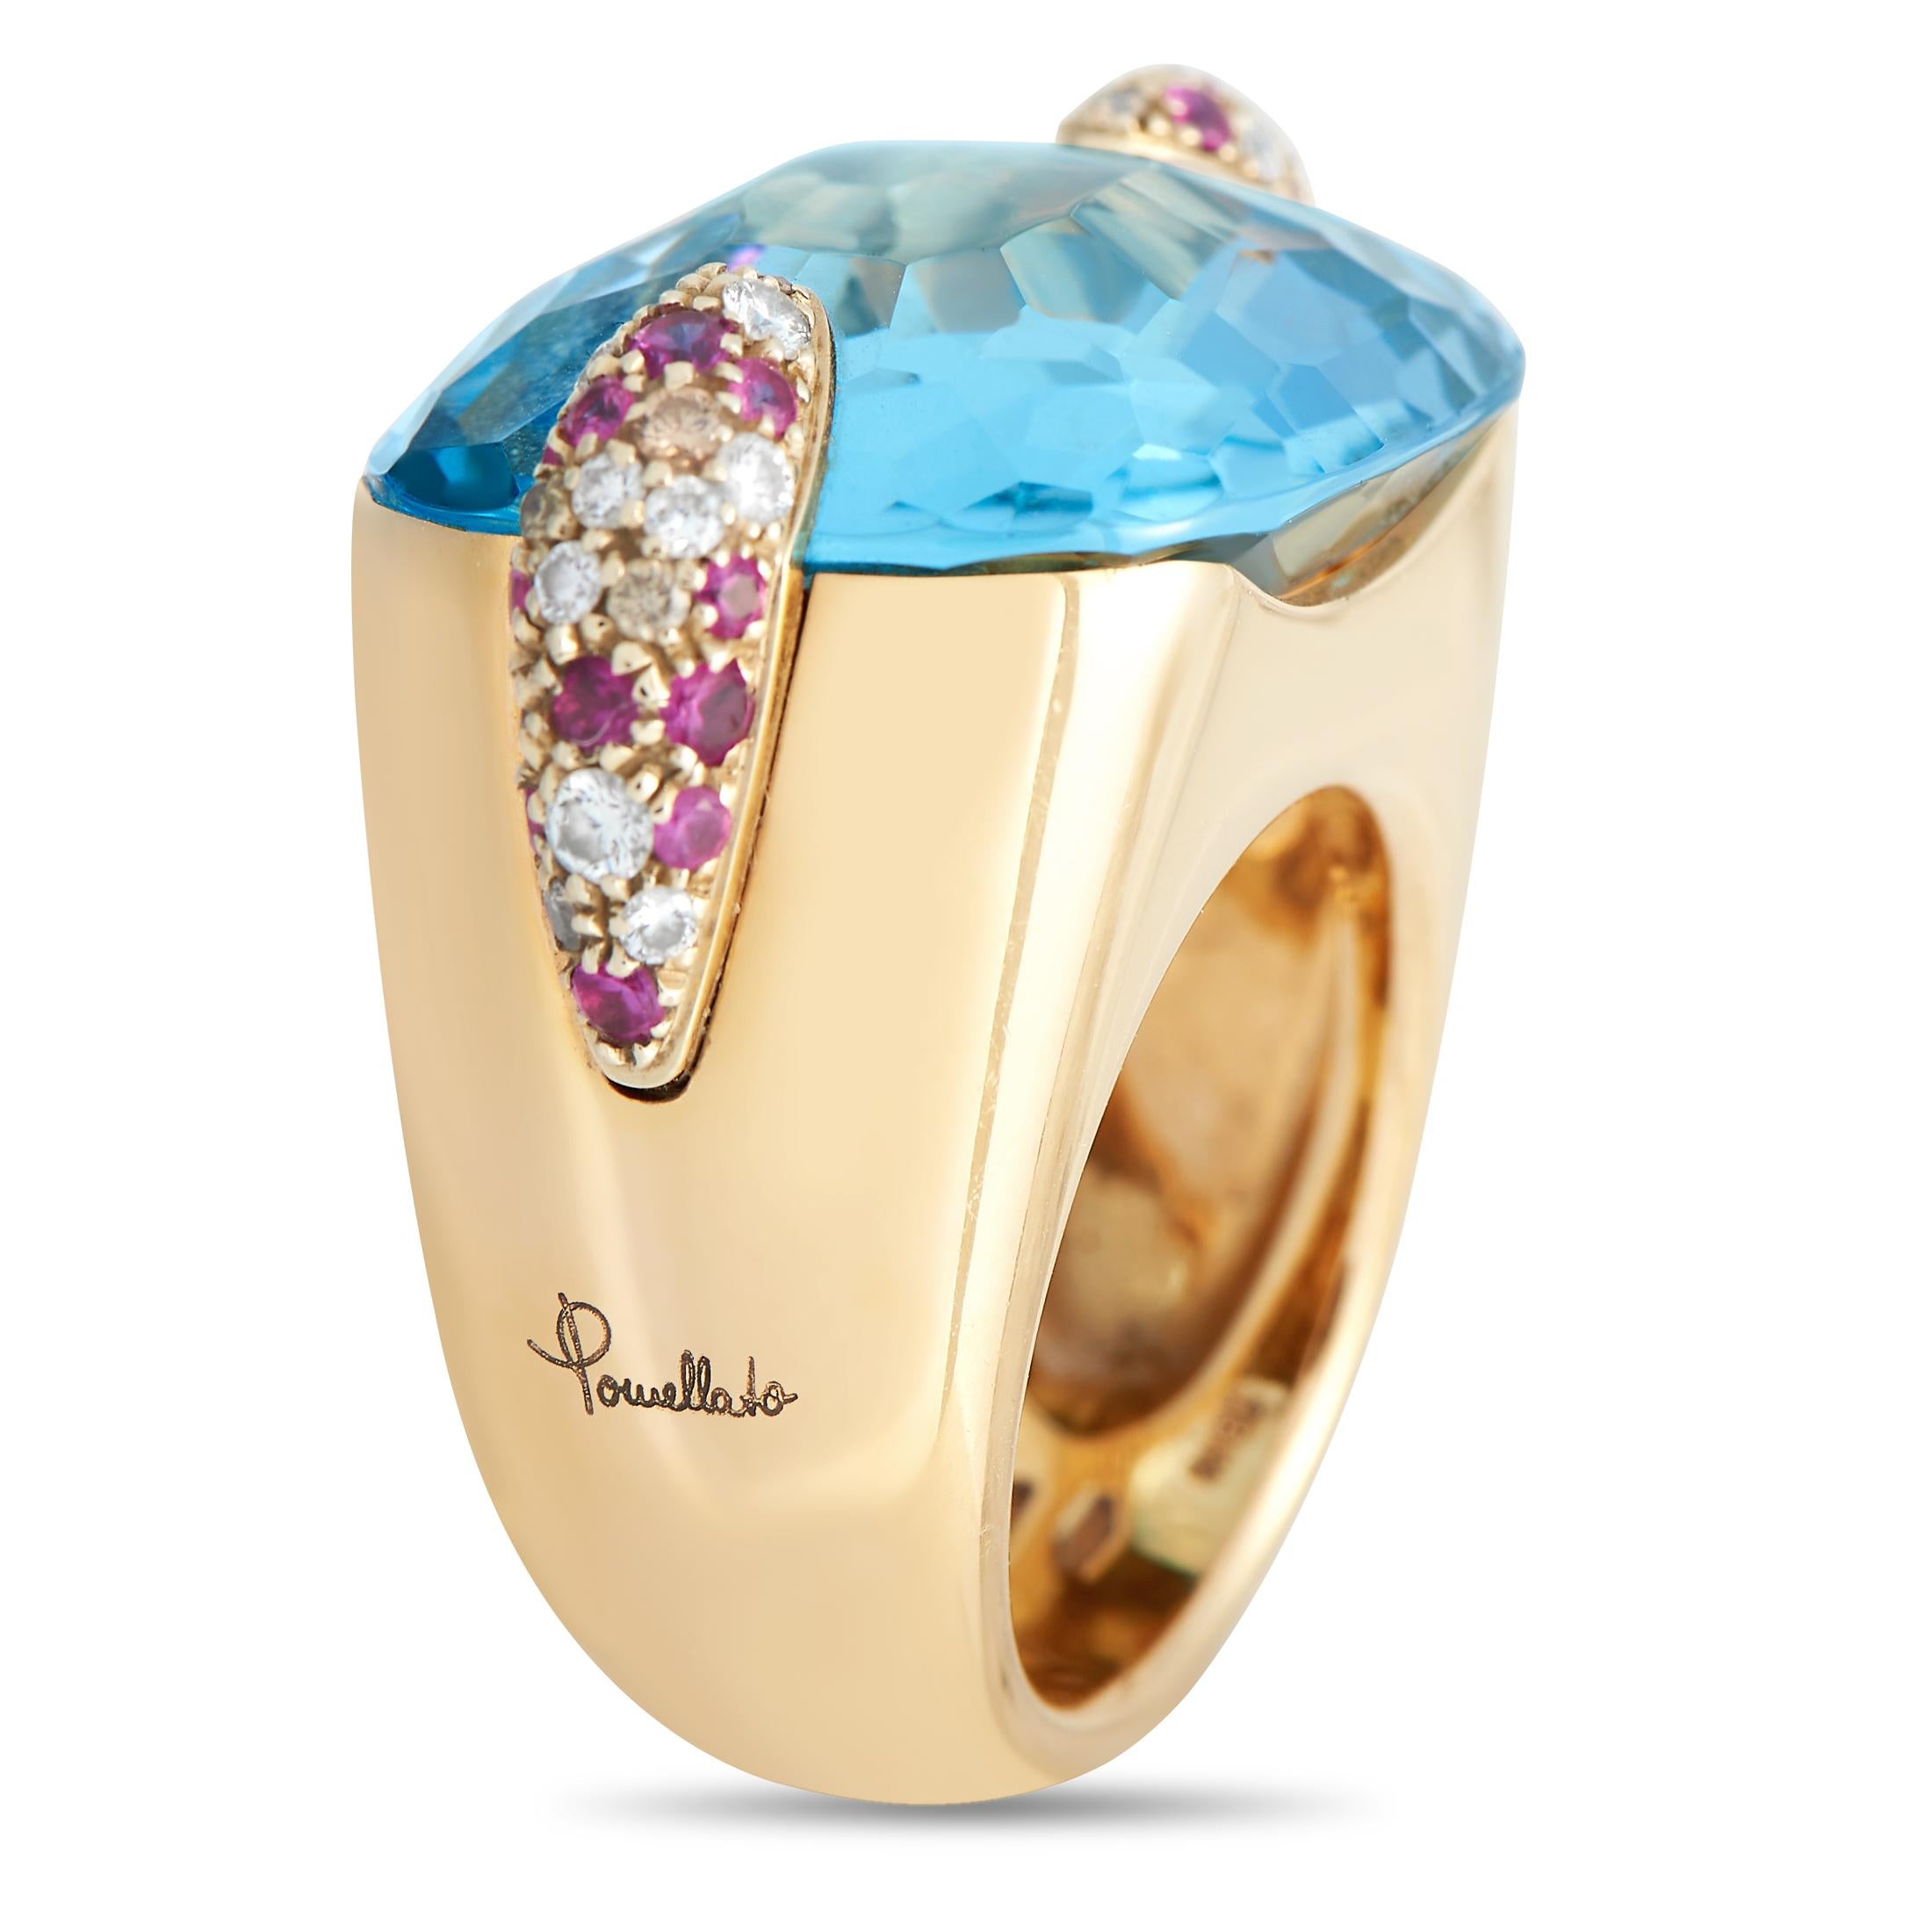 Draw attention to your unique style with this flamboyant yet elegant Pomellato Pin Up cocktail ring. It features a 10mm thick domed band in 18K yellow gold topped with an eye-catching cushion-cut topaz gemstone. Further securing and highlighting the